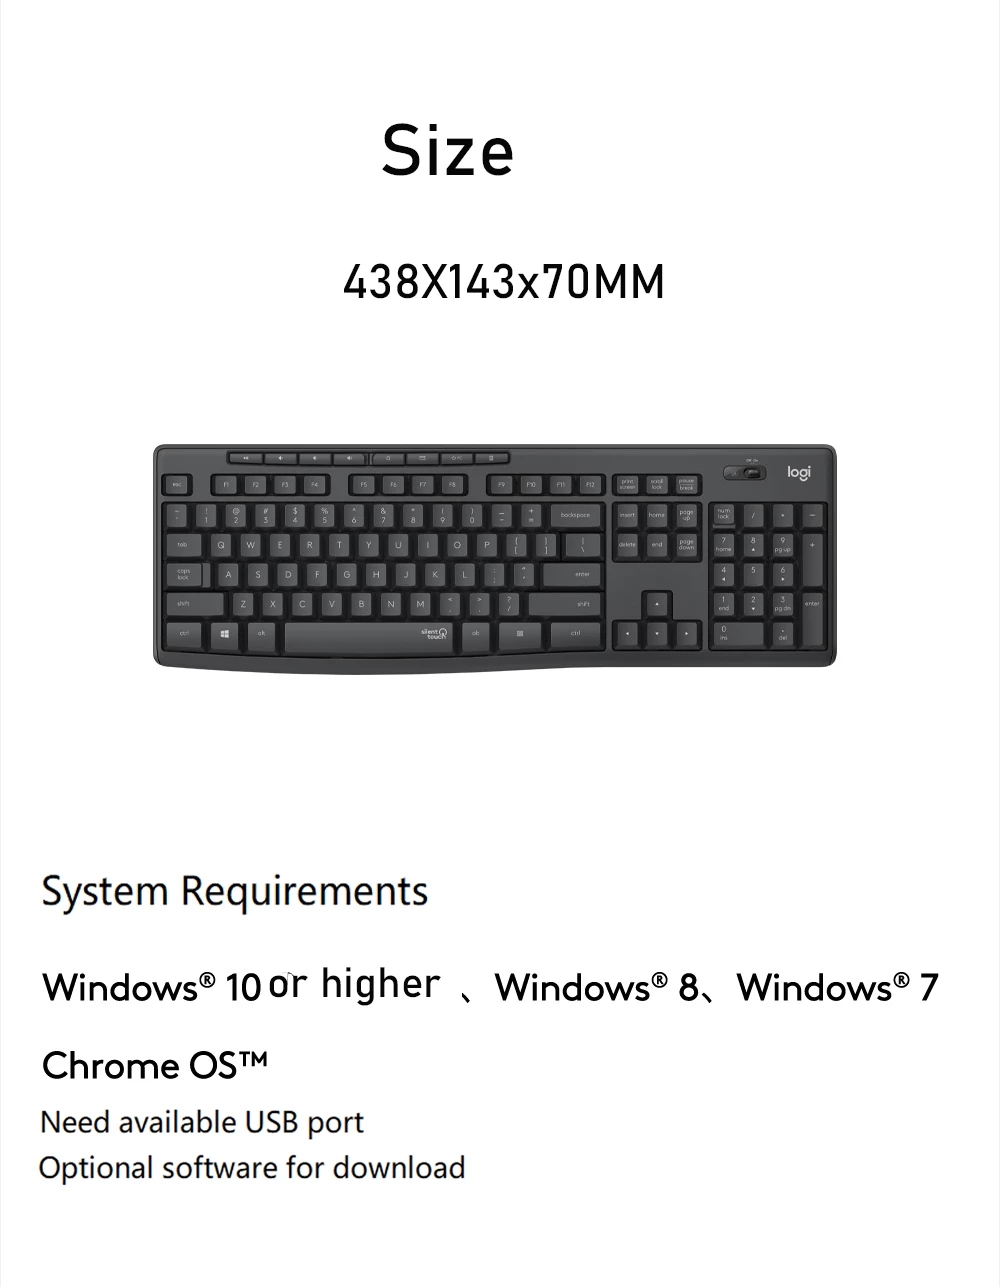 Original Logitech MK295 Wireless Mouse Keyboard Combo Keyboard Mice Set Advanced Optical Tracking Mice For Home Office Gaming